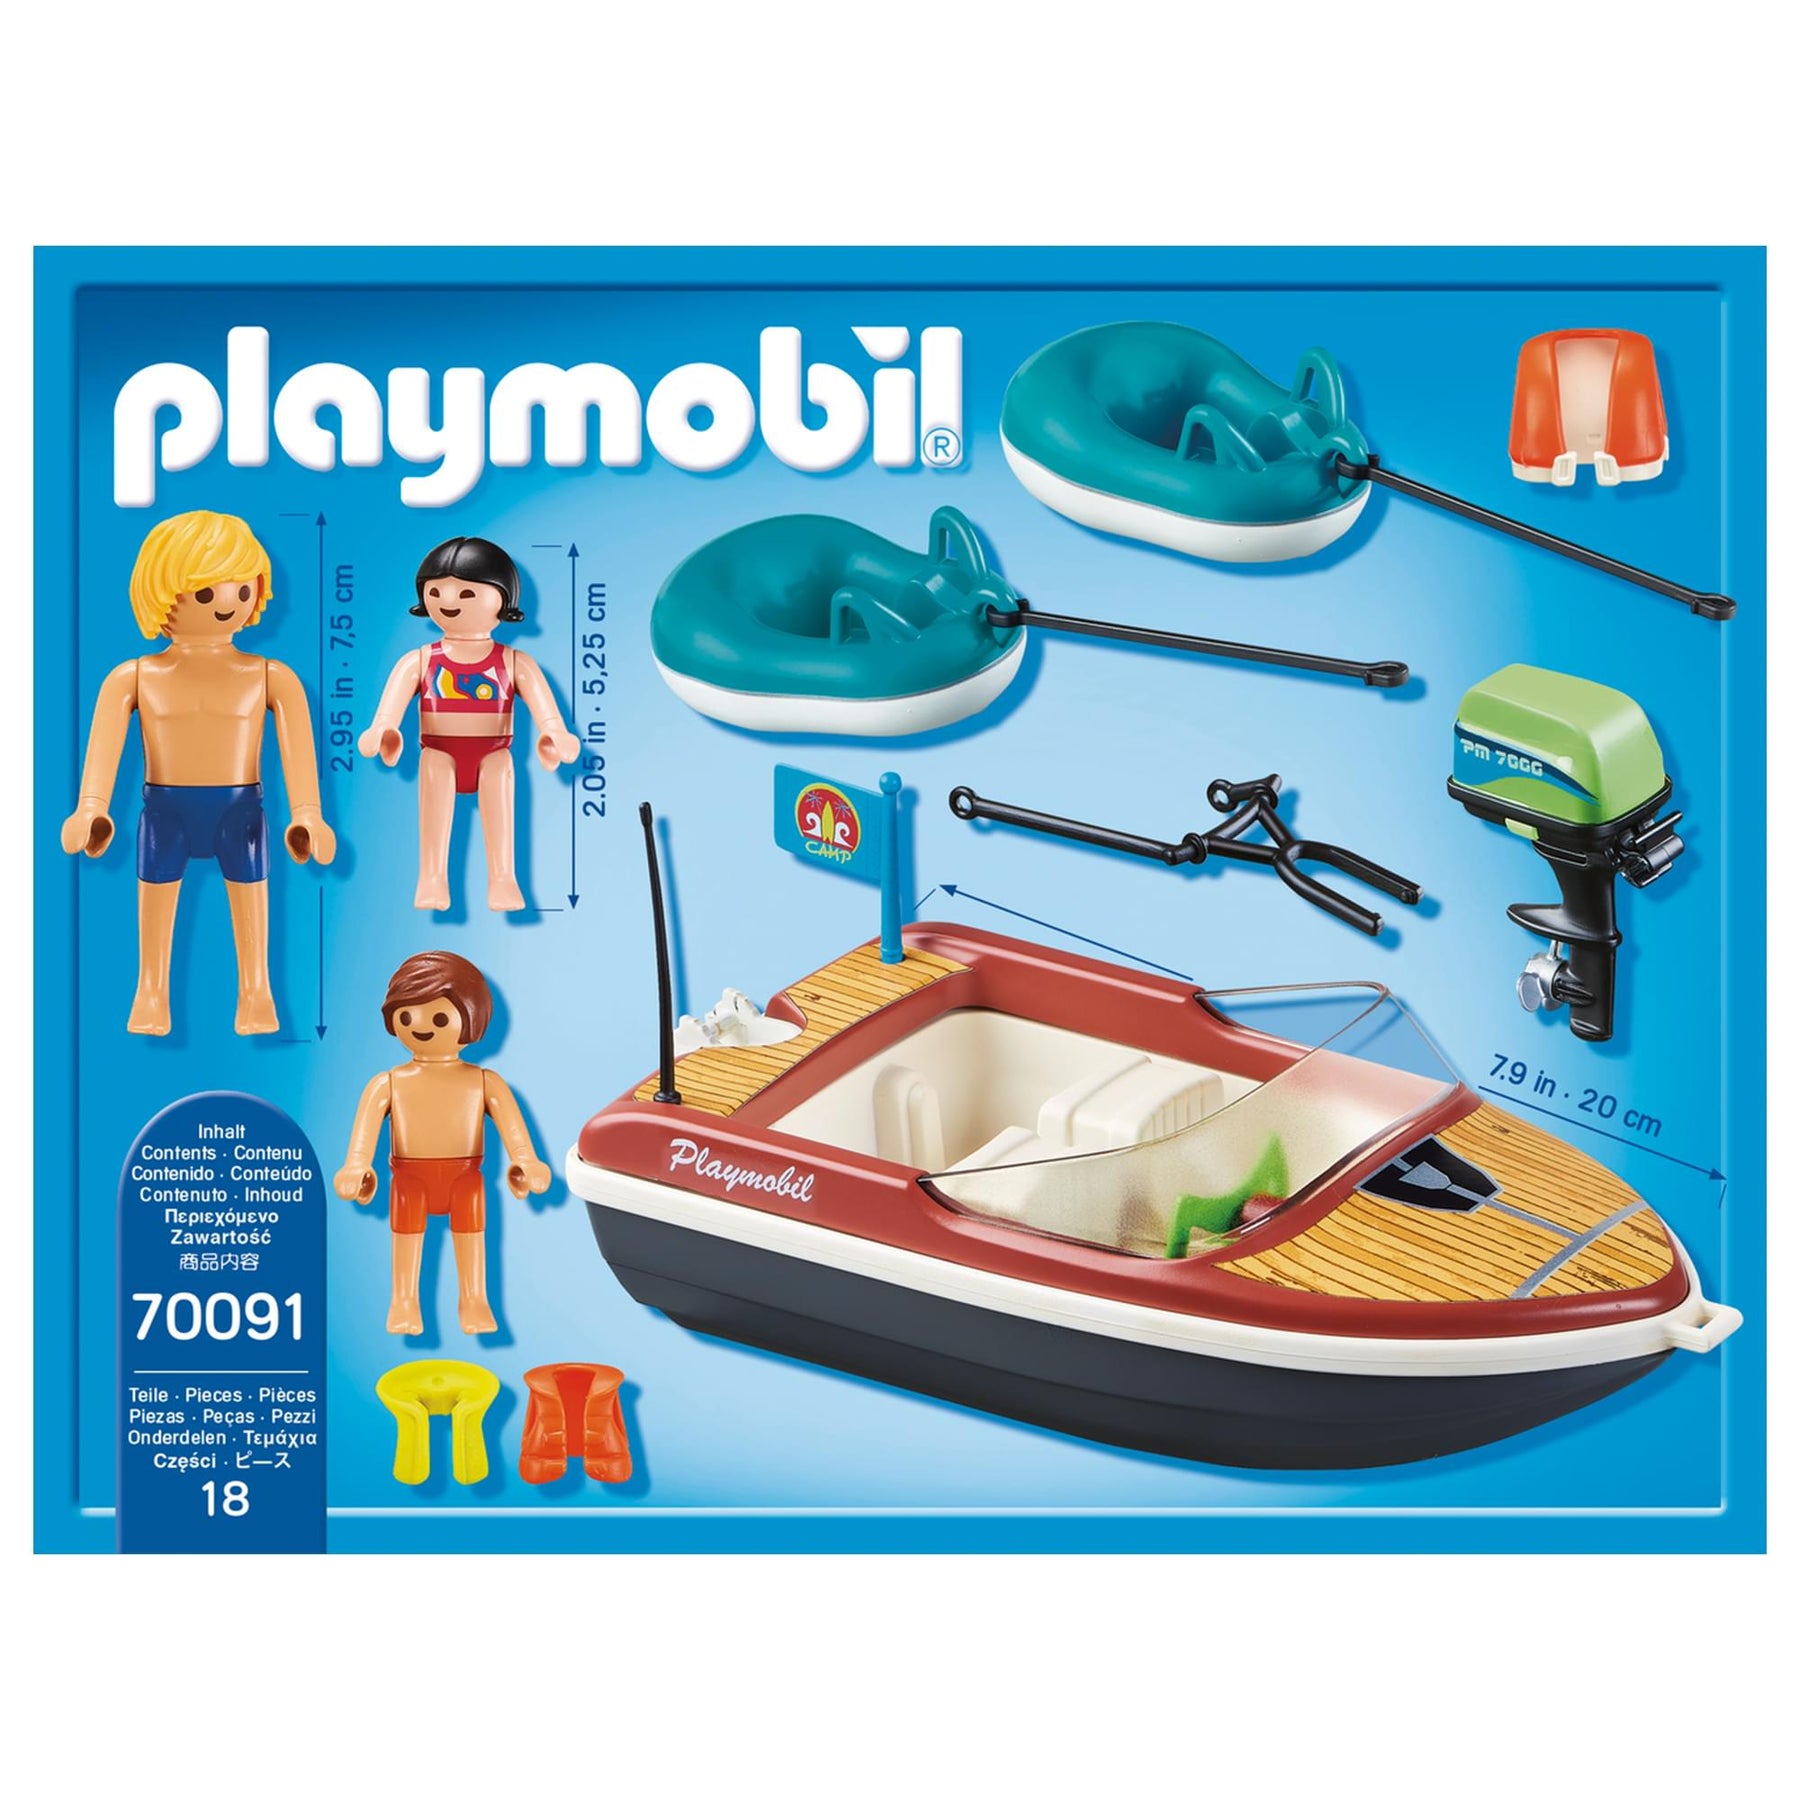 Playmobil Family Fun 70091 Speedboat with Tube Riders Playset